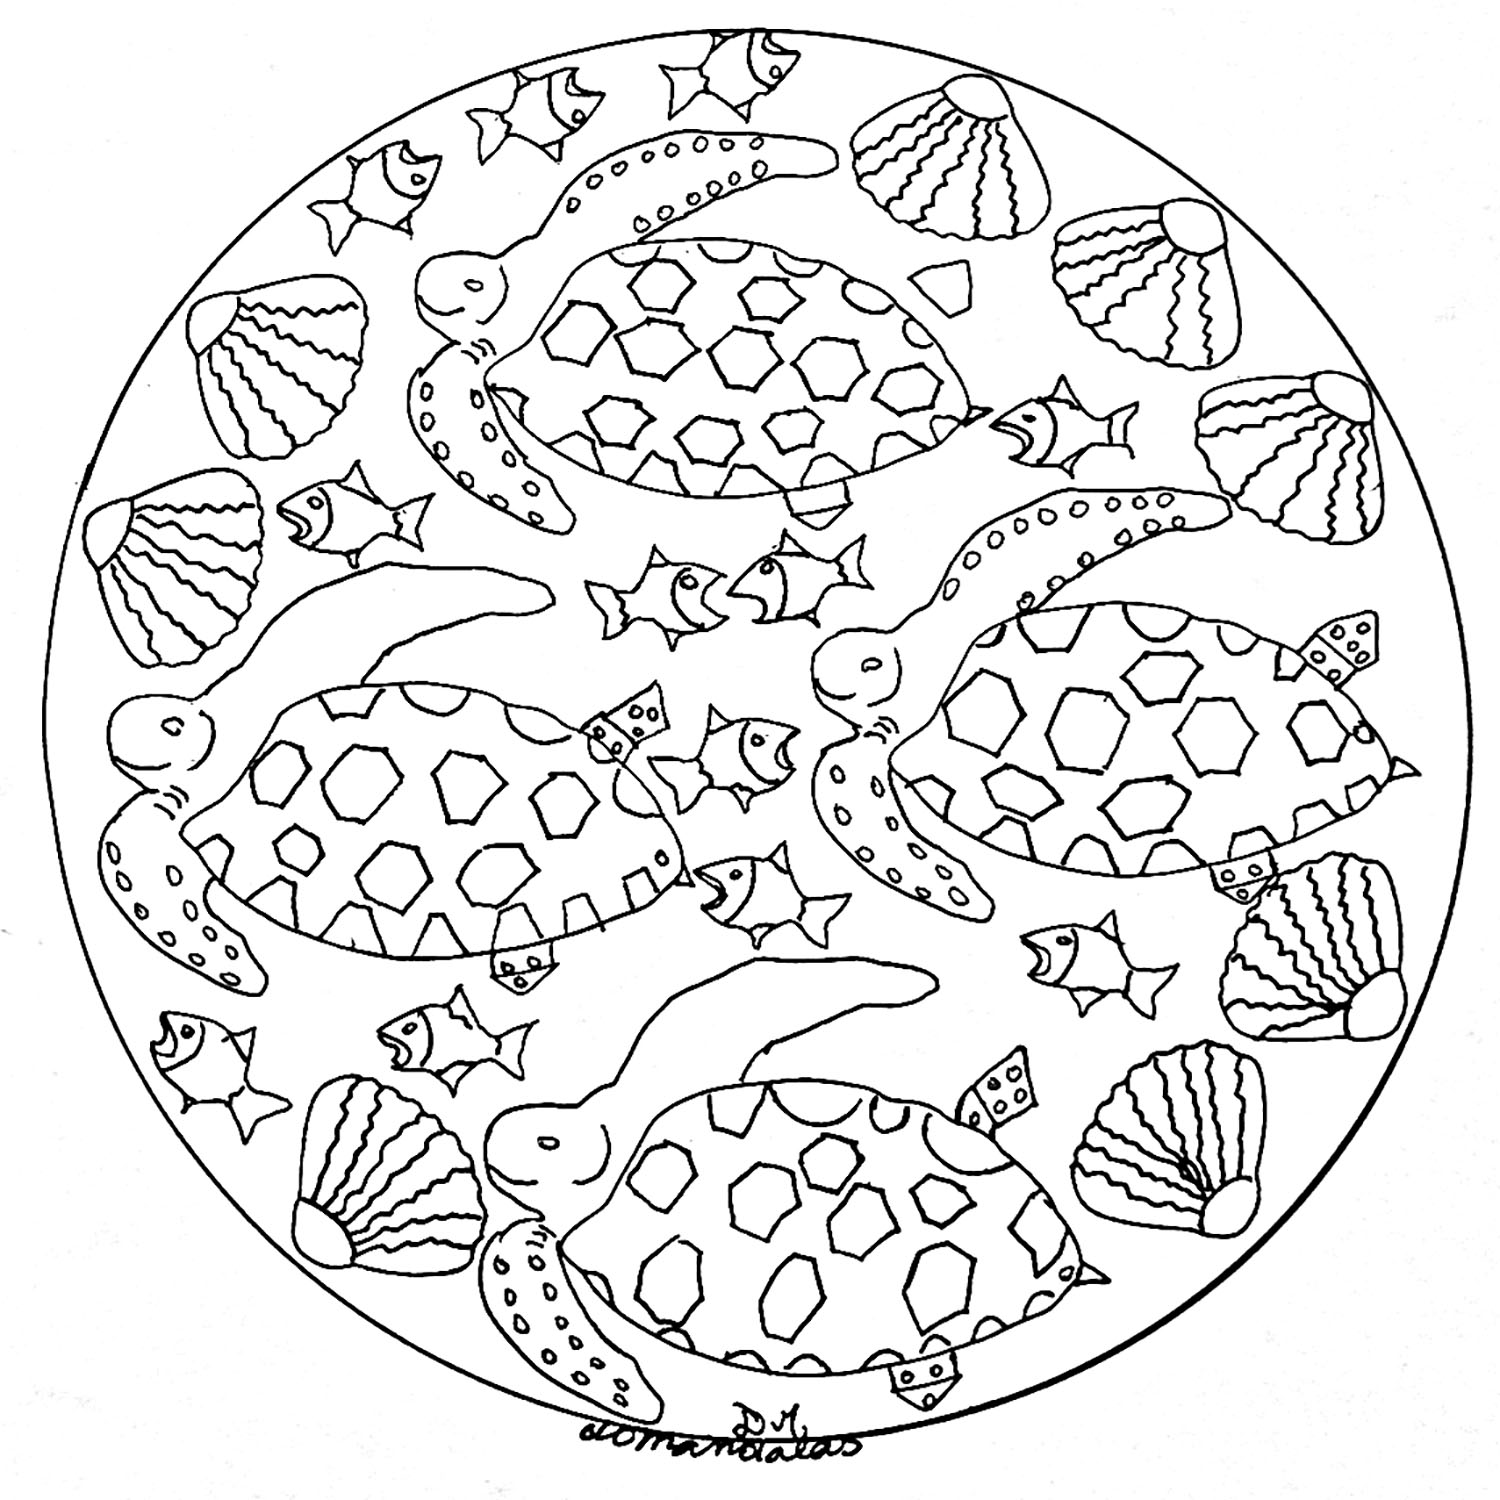 Fishes in the sea. If you are looking for a Mandala not too complicated to color, but still with a relative difficulty level, this one is perfect for you. Do whatever it takes to get rid of any distractions that may interfere with your coloring.